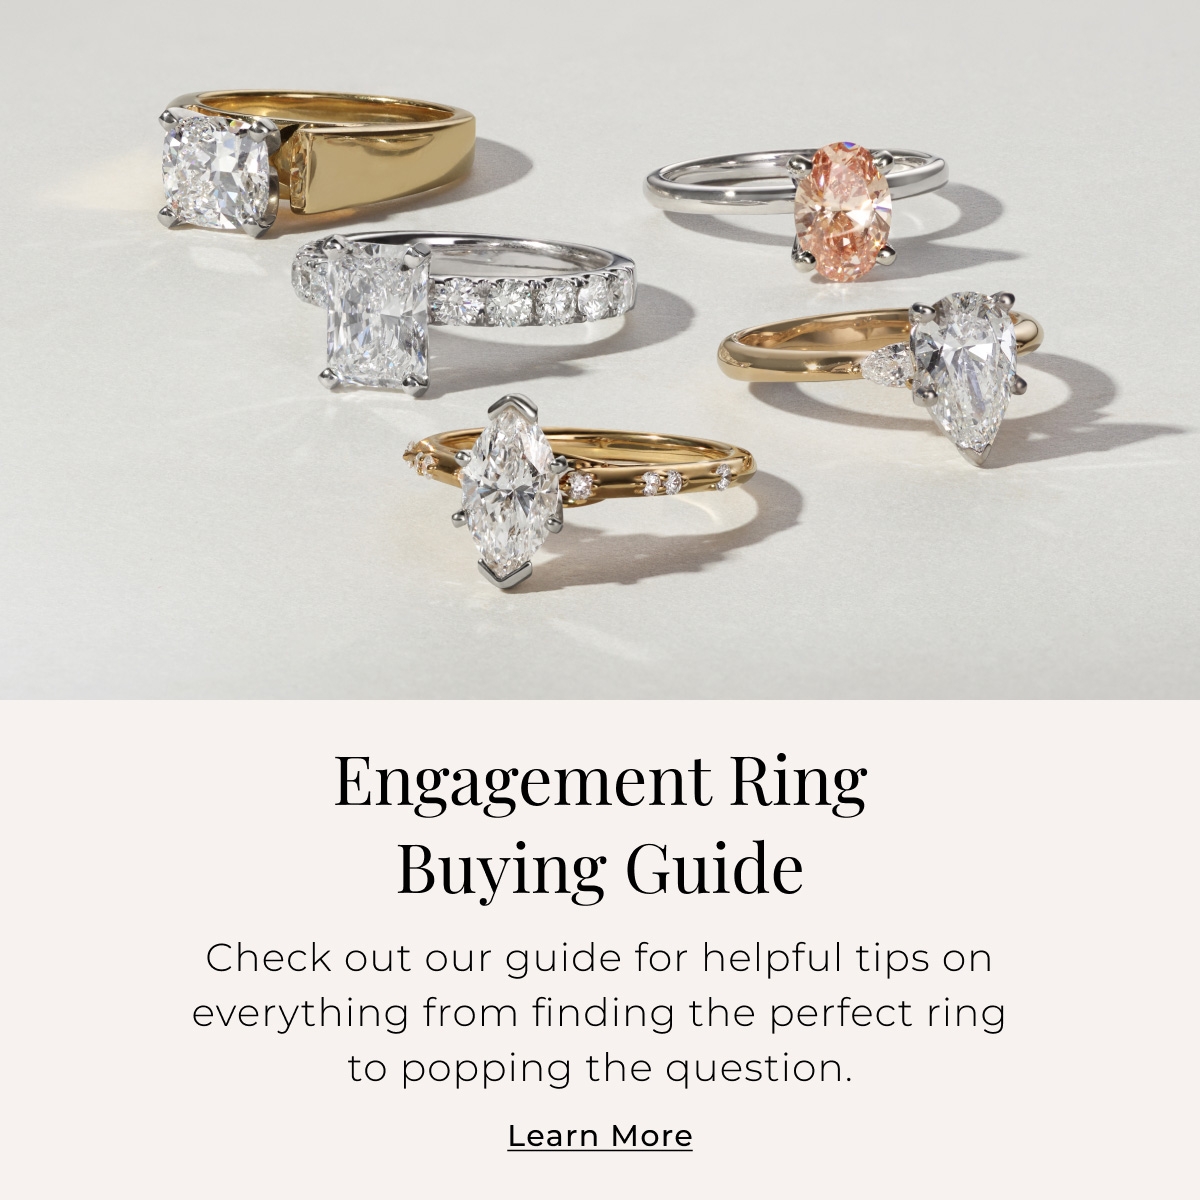 Engagement Ring Buying Guide - Check out our guide for helpful tips on everything from finding the perfect ring to popping the question. Learn More >